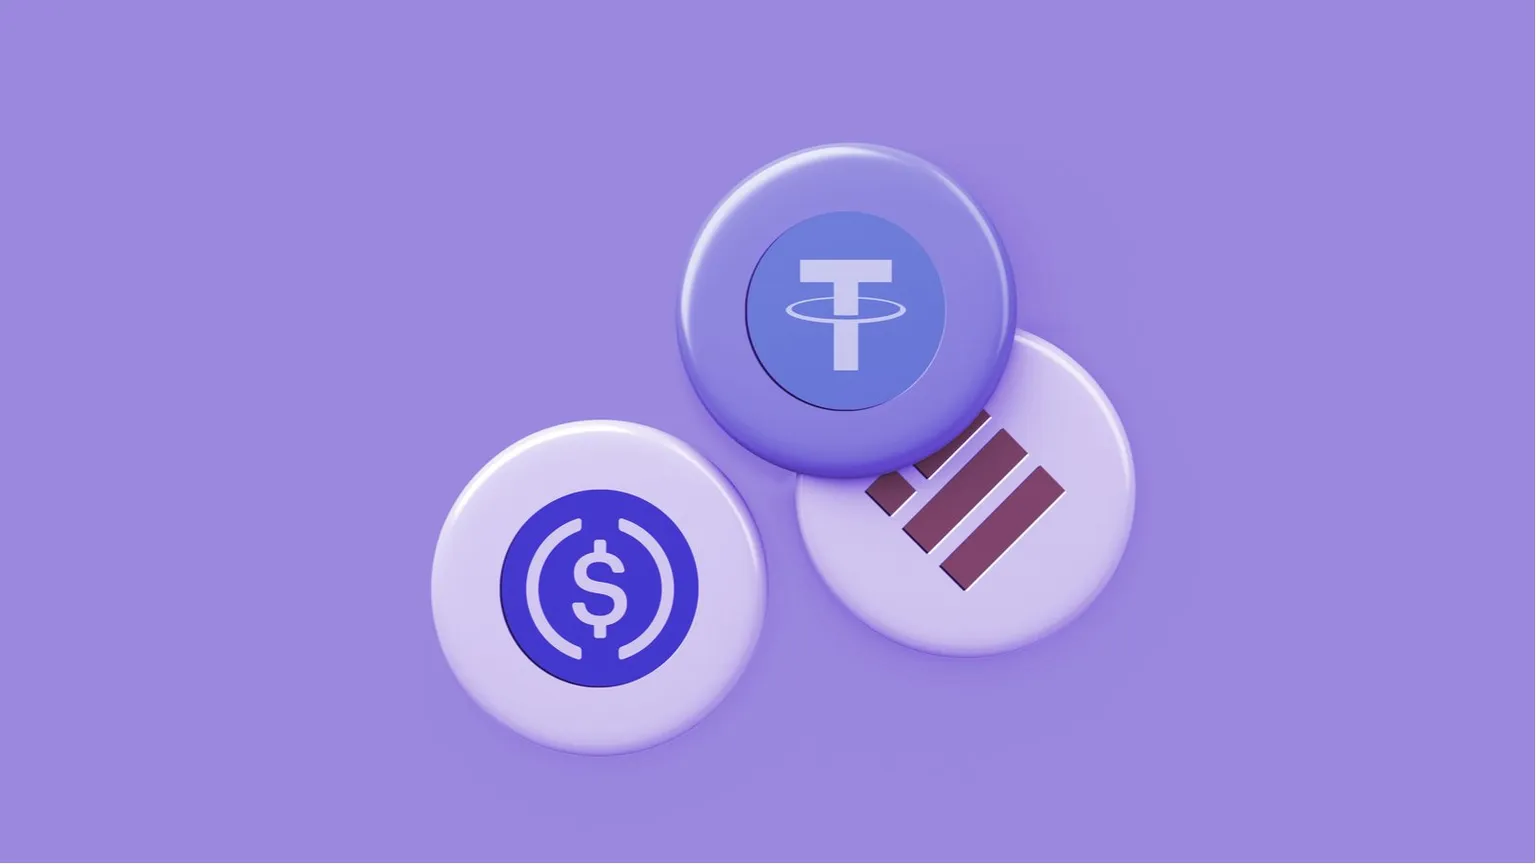 Tether, USDC, and Binance all offer stablecoins for the crypto industry. Image: Shutterstock